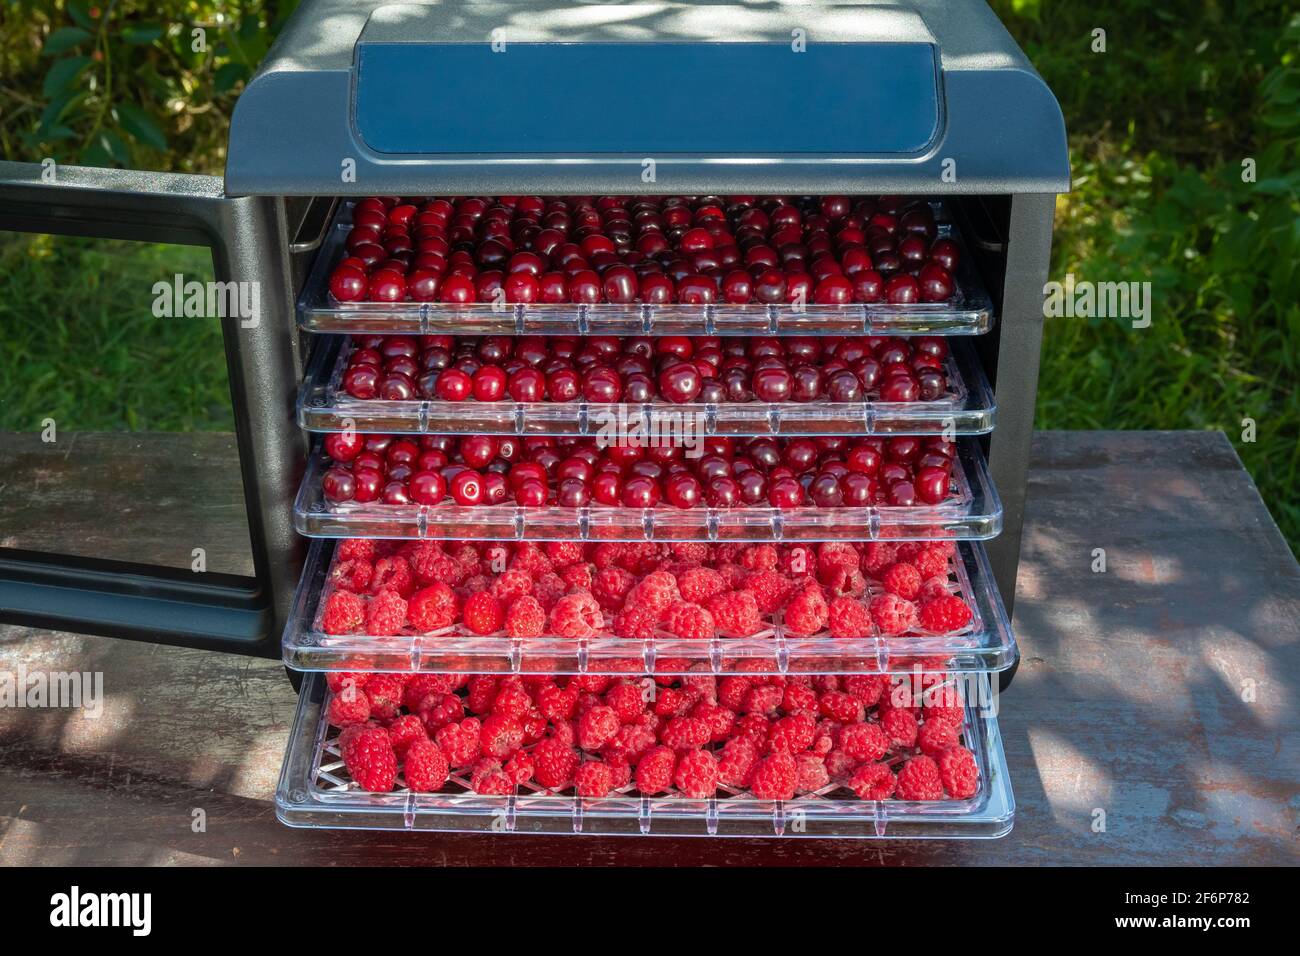 Fresh cherries and raspberries ready for dehydration in an electric drying machine for home drying of fruits and berries. Stock Photo